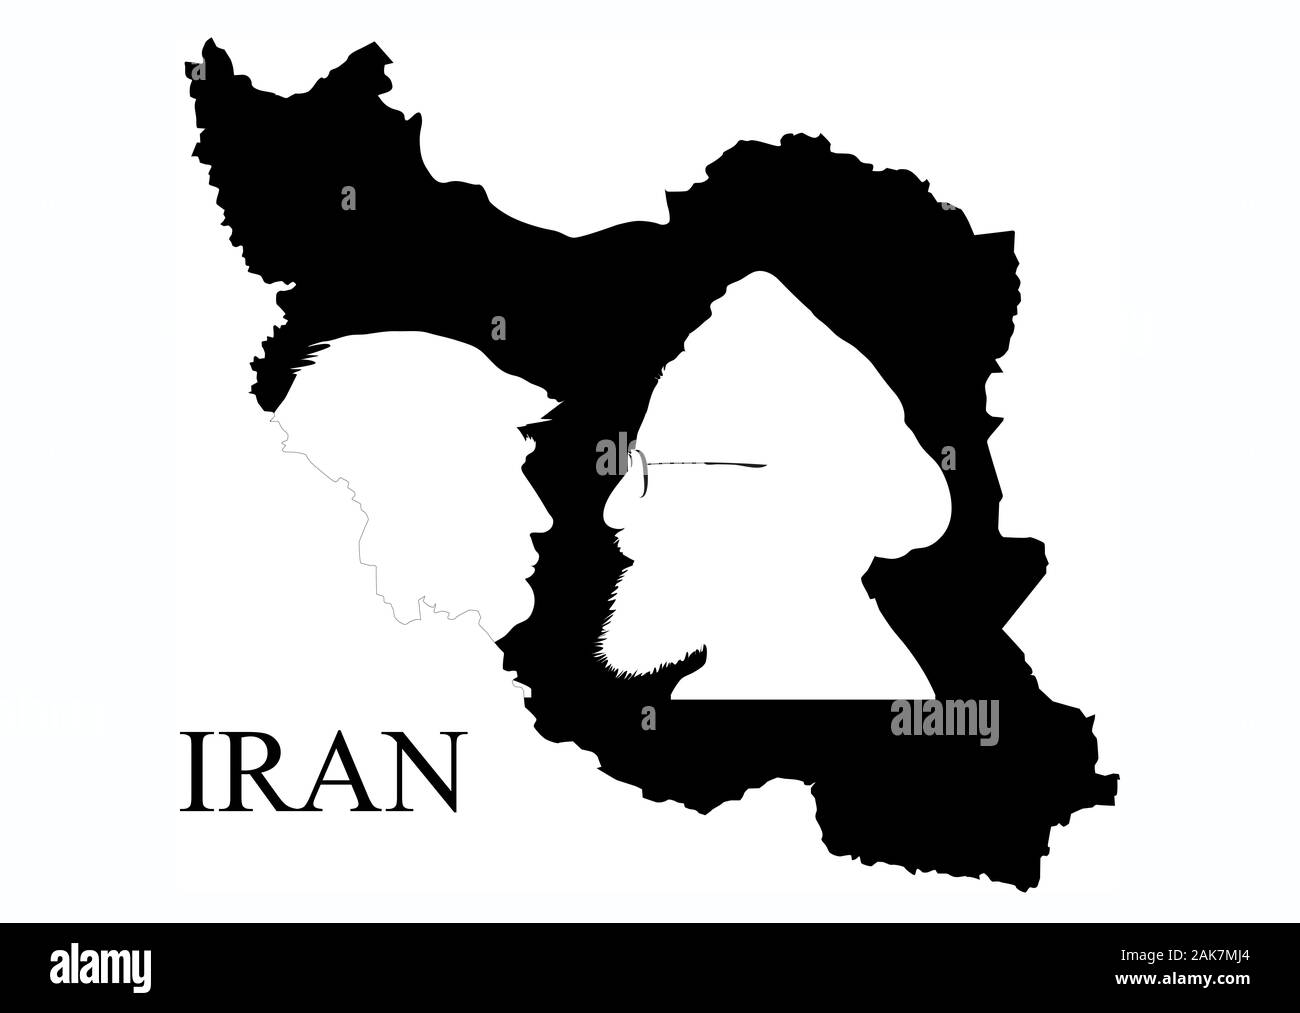 Donald Trump vs. Hassan Rouhani. Silhouette of leaders of the United States and Iran, placed on the shape of Iran territory. Conceptual illustration. Stock Photo